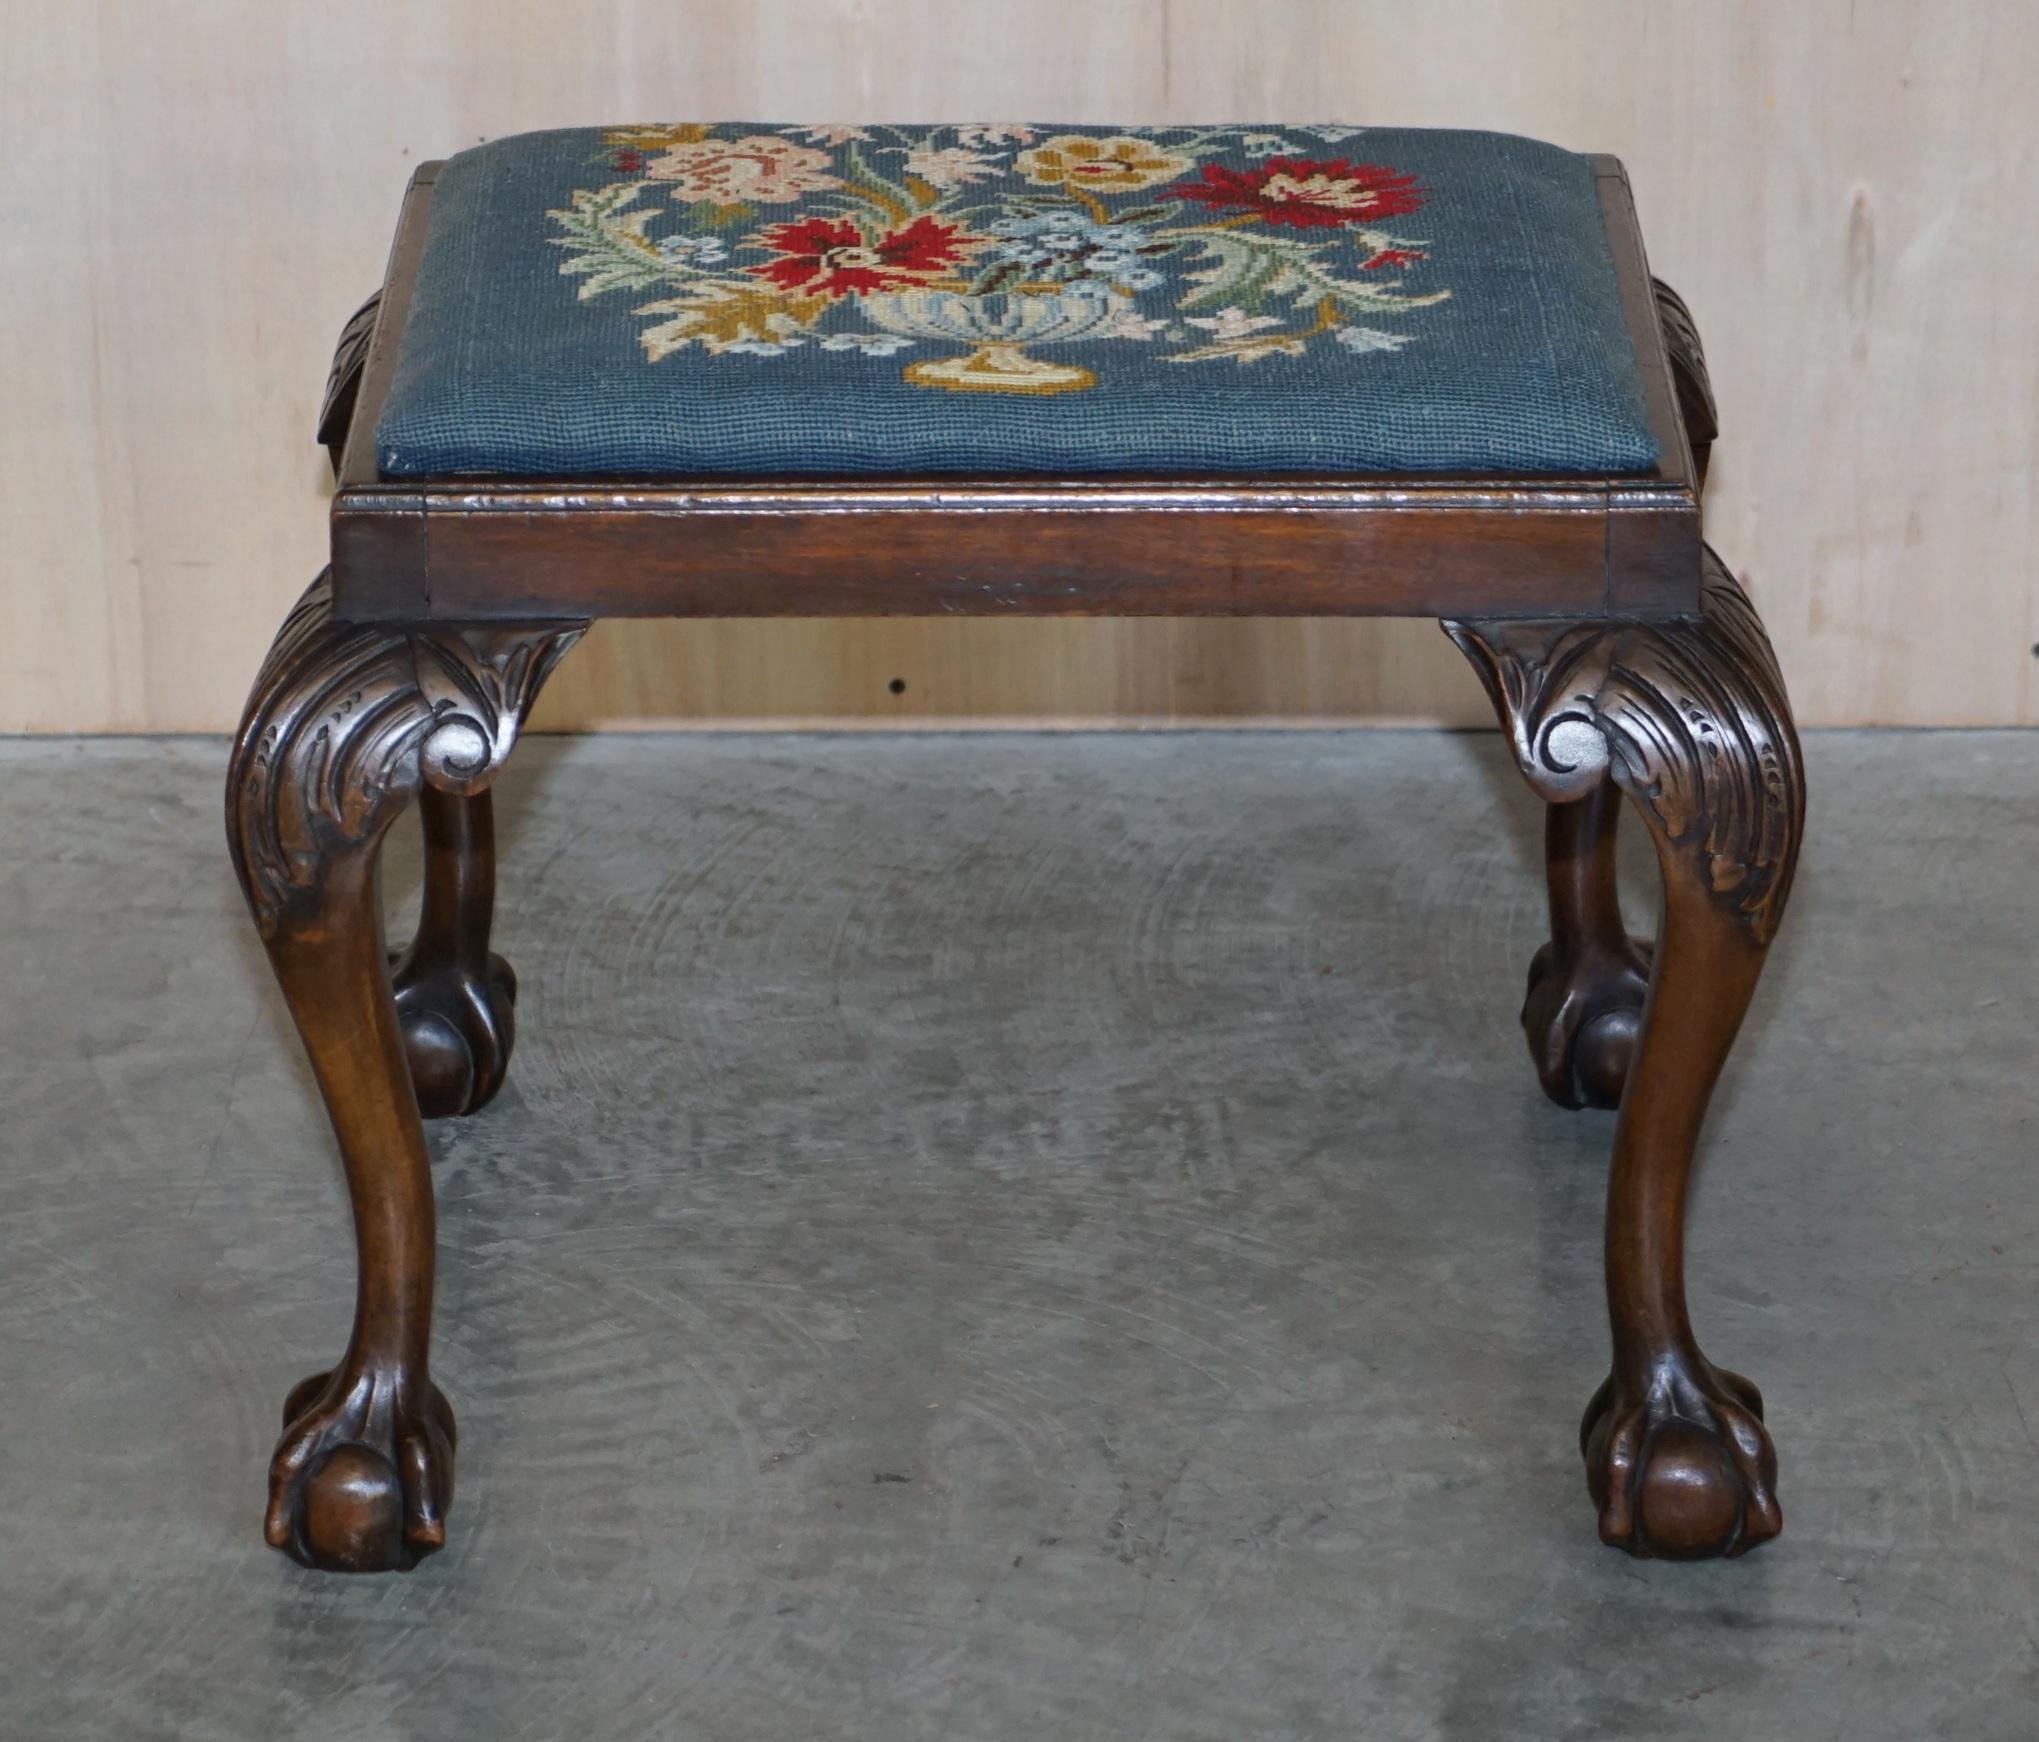 We are delighted to offer for sale this lovely original Thomas Clarkson & Sons LTD circa 1940 hand carved claw & ball cabriolet legged stool based on a George III design.

A very decorative and well made piece, the top has a period Victorian